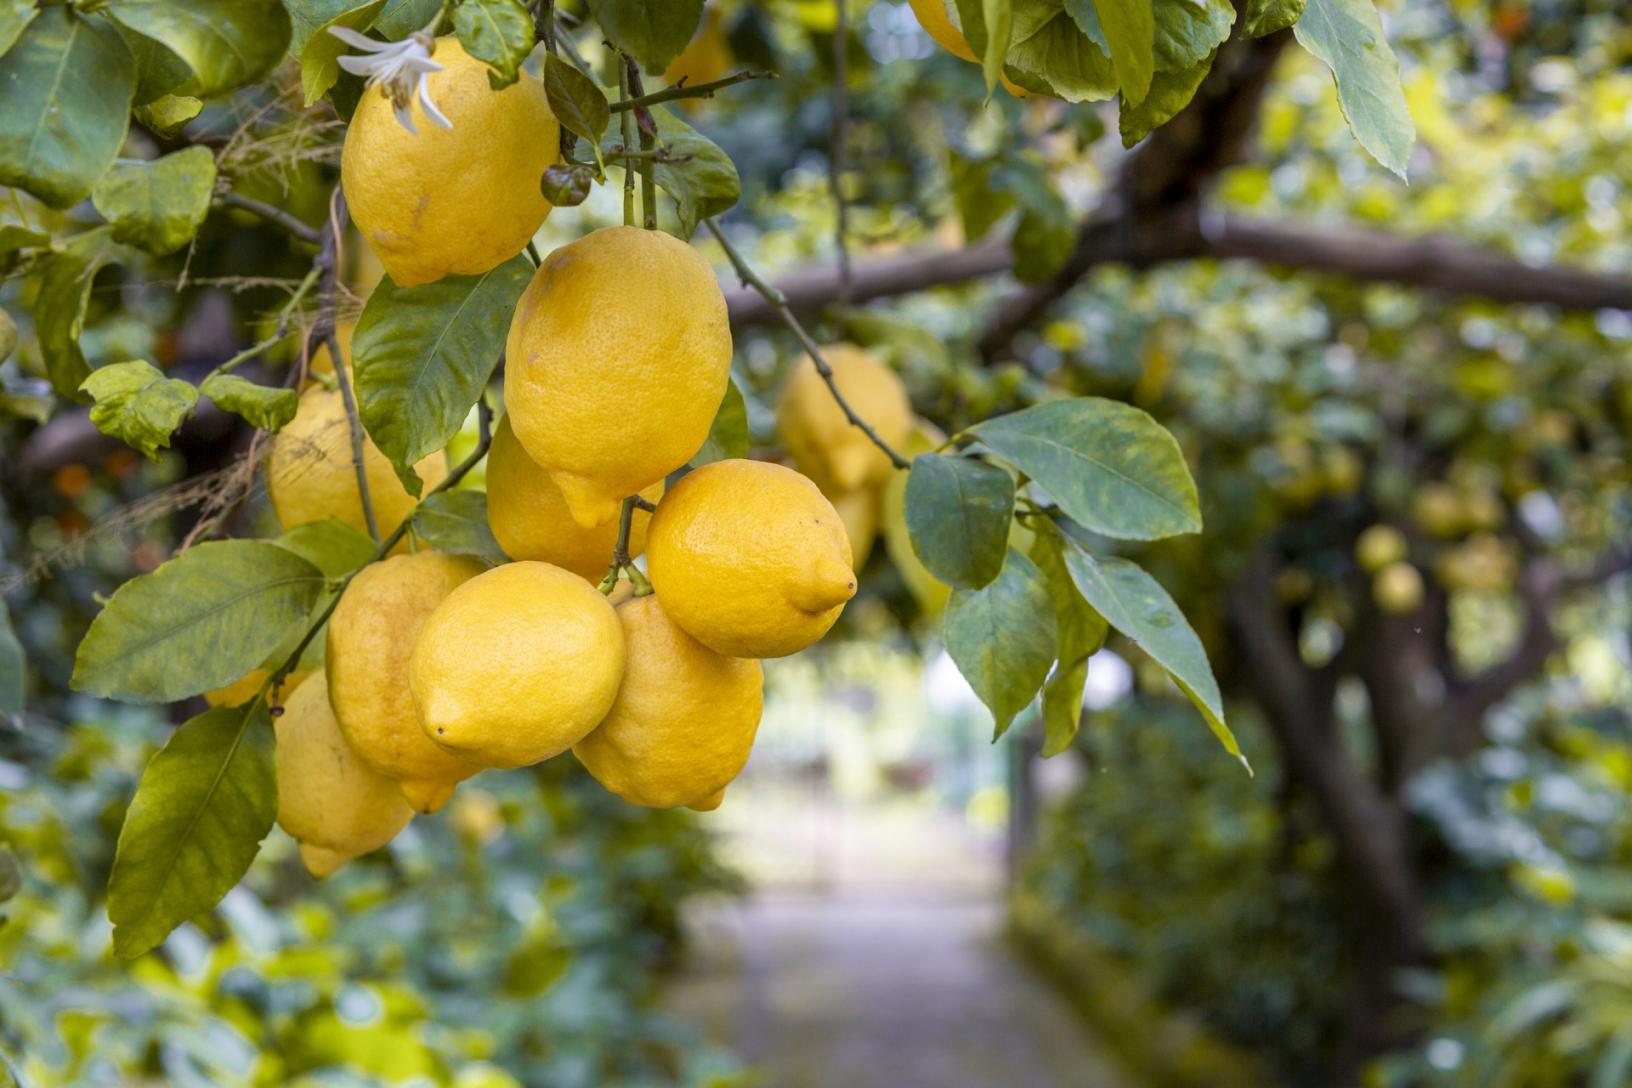 Visit our typical Sorrento garden with lemon grove